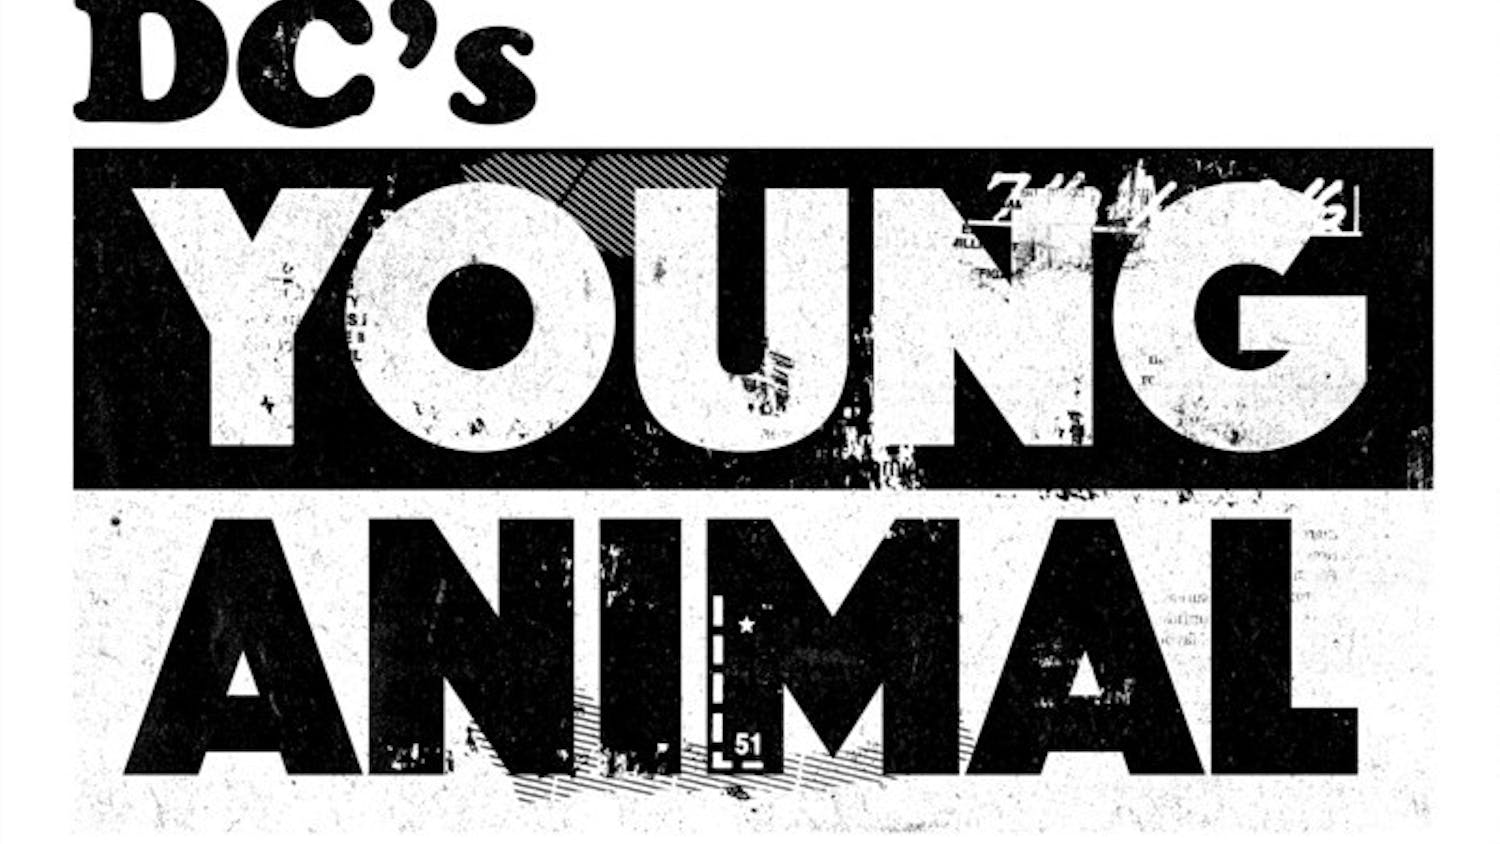 DC Comic's released the&nbsp;"Young Animal" series on Sept. 14, bringing back a classic style and "mature reads" similar to their original attempt with "Vertigo."